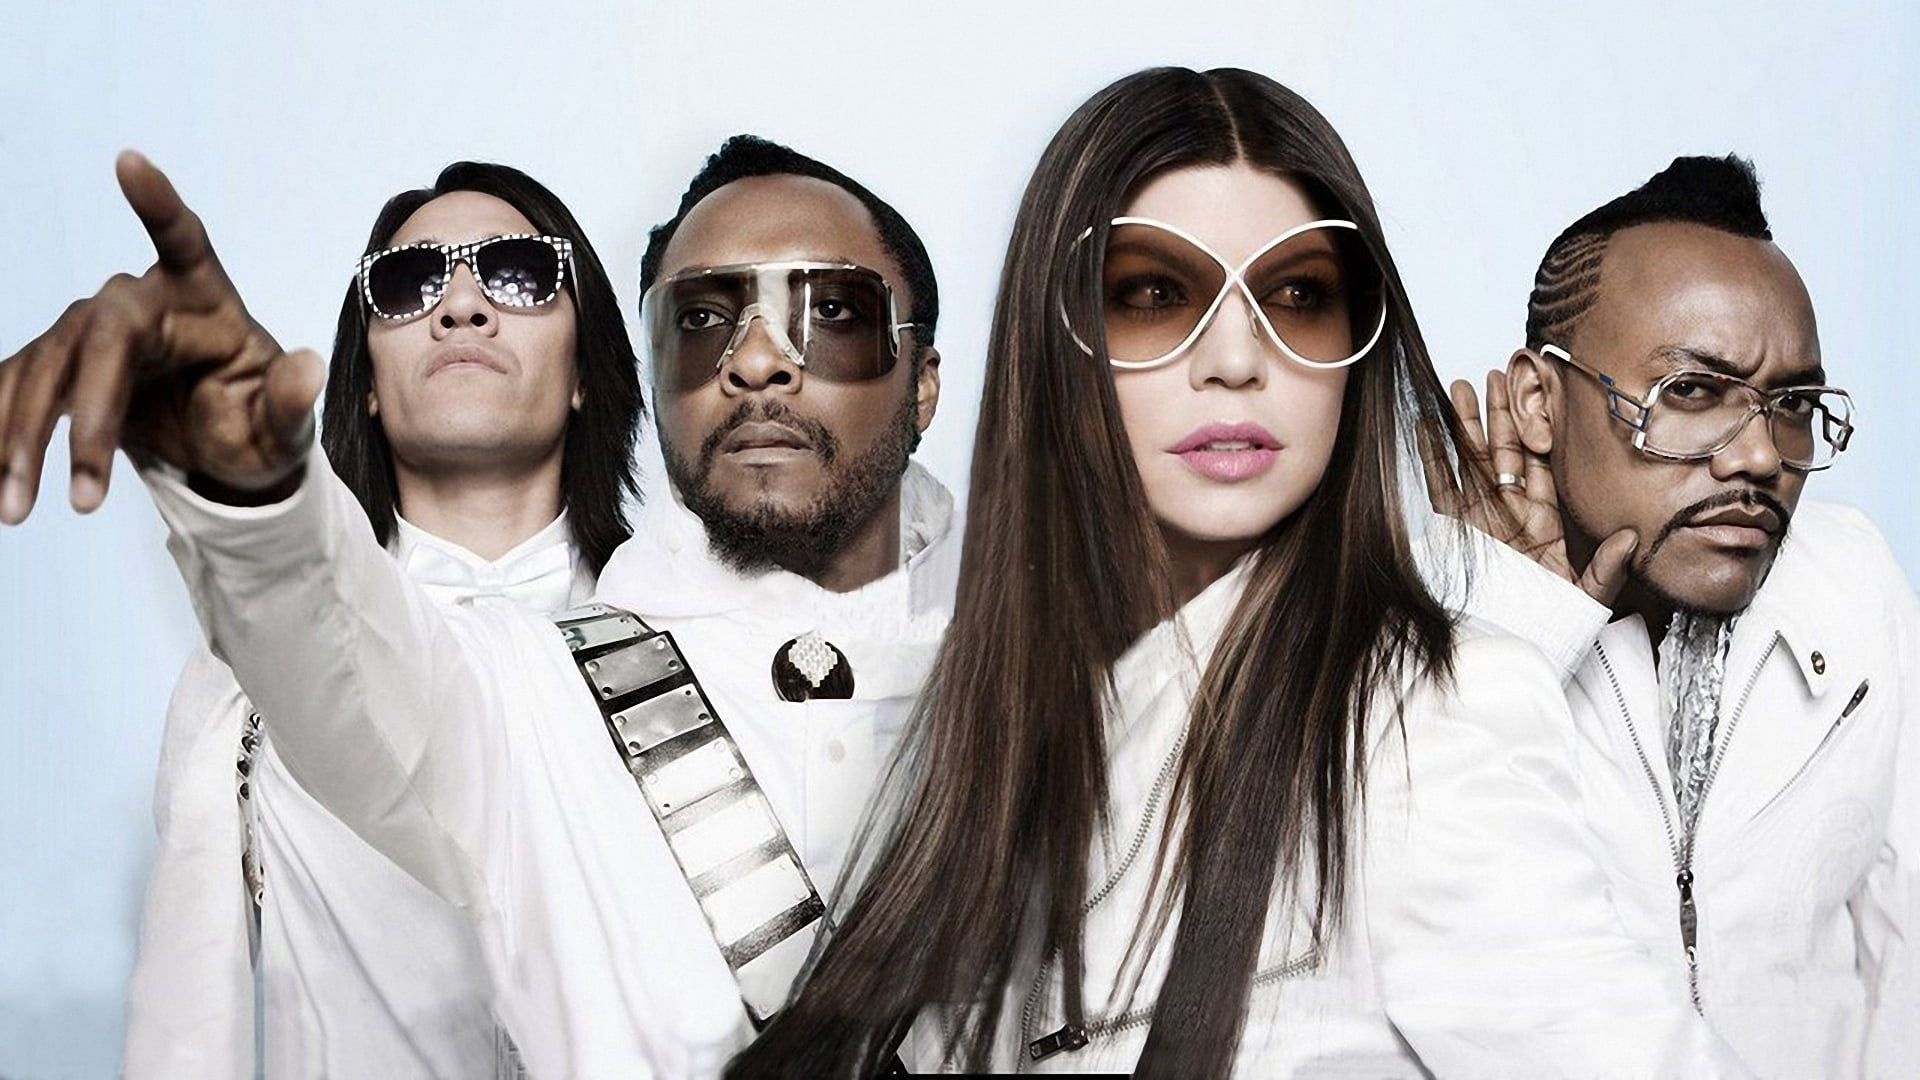 The Black Eyed Peas: The band's return in 2009, The E.N.D., Cemented their prominence in the pop music world. 1920x1080 Full HD Background.